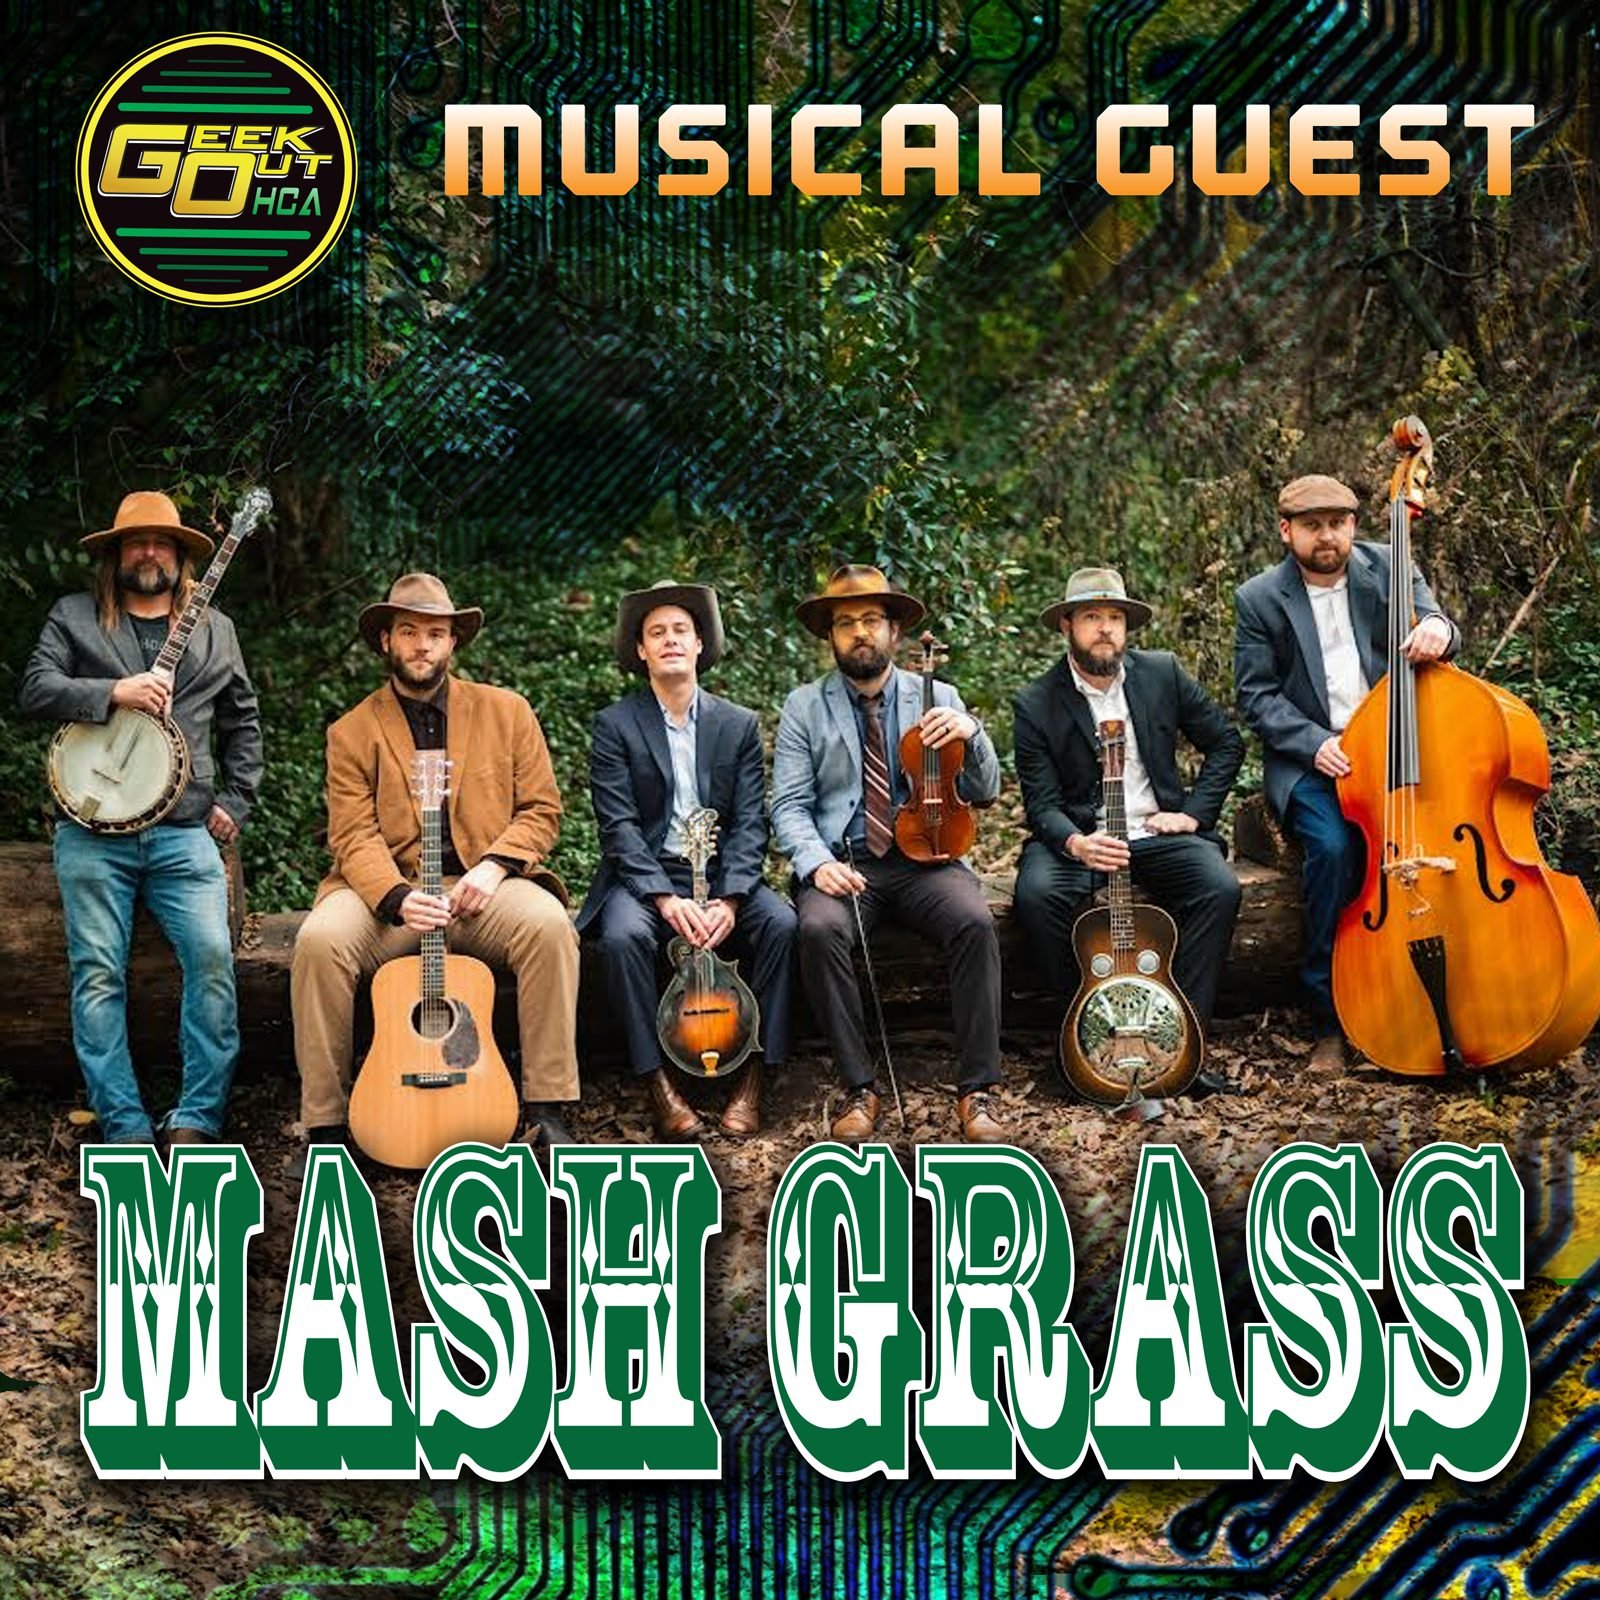   MUSICAL GUEST ANNOUNCEMENT  Mash Grass, a Kentucky based Bluegrass band, is going to be joining us this year! Join us in welcoming them Saturday night of the event on Main Stage!  